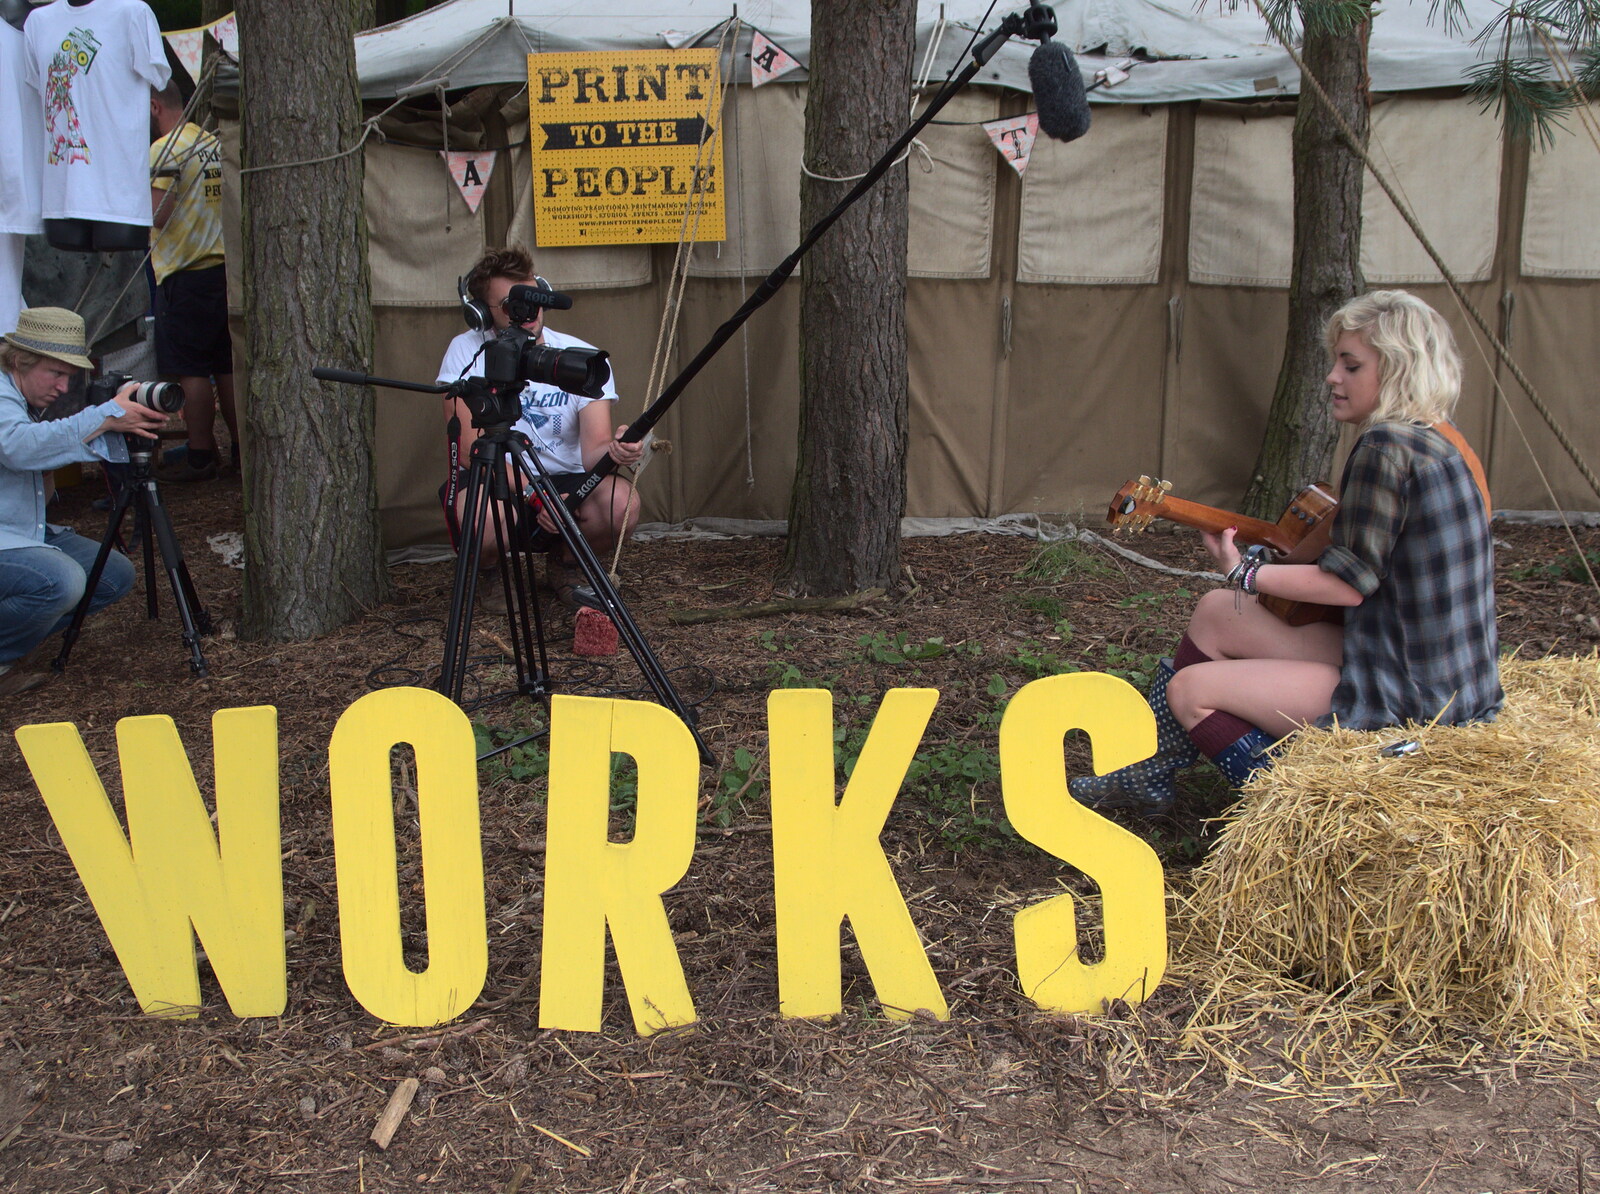 Some straw-bale acoustic is filmed from Latitude Festival, Henham Park, Southwold, Suffolk - 17th July 2014